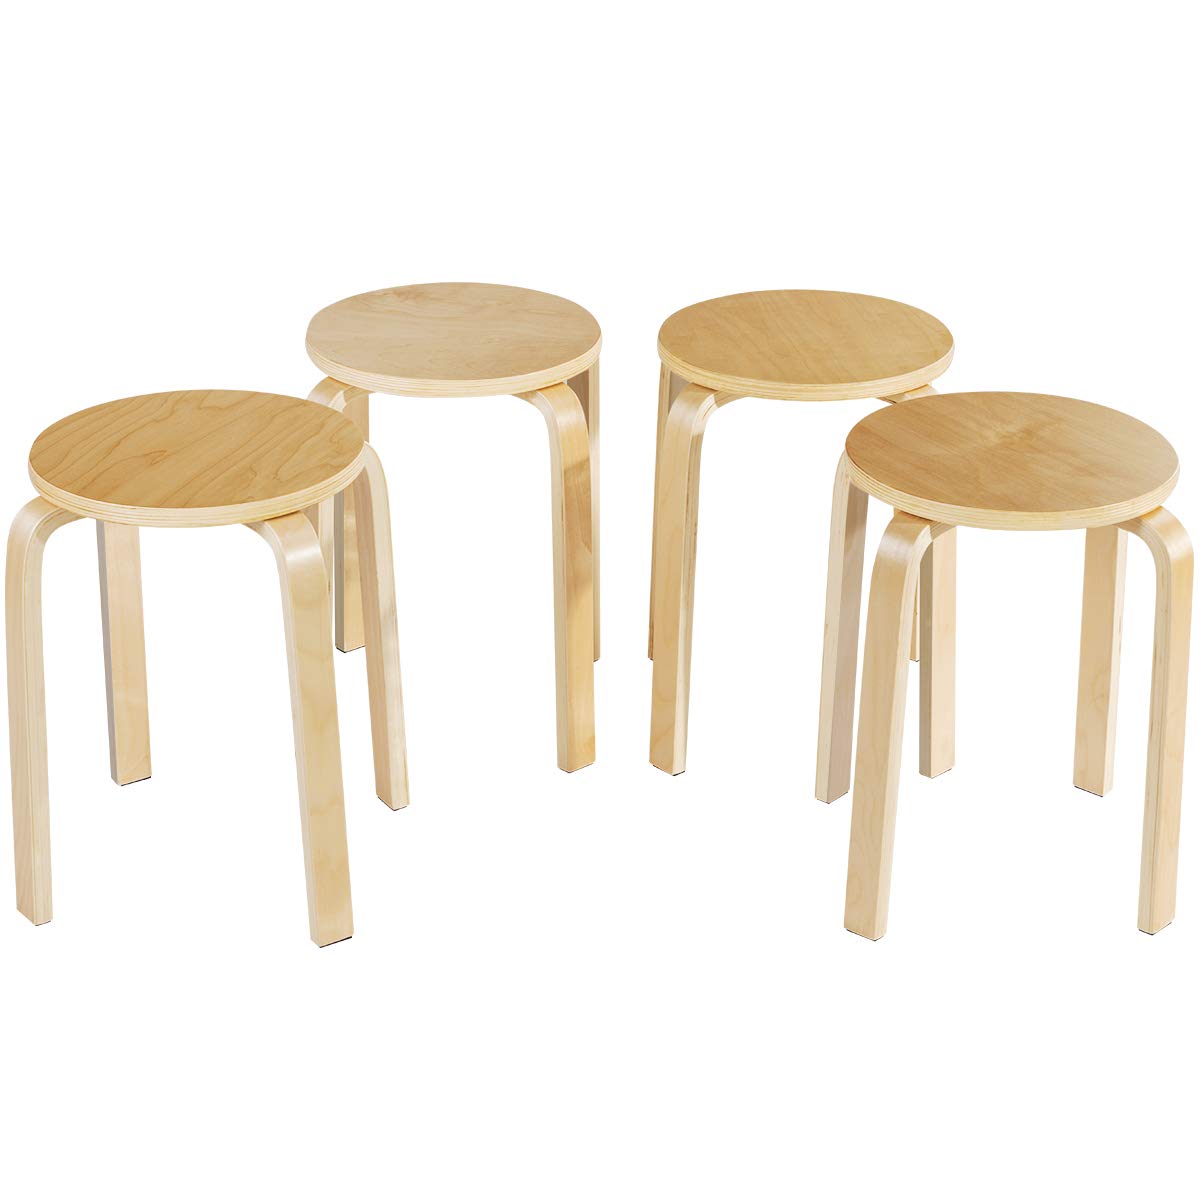 Stackable Bentwood Stools Set of 4, 18-Inch Height Backless Counter Chairs with Round Top, Anti-Slip Felt Pad